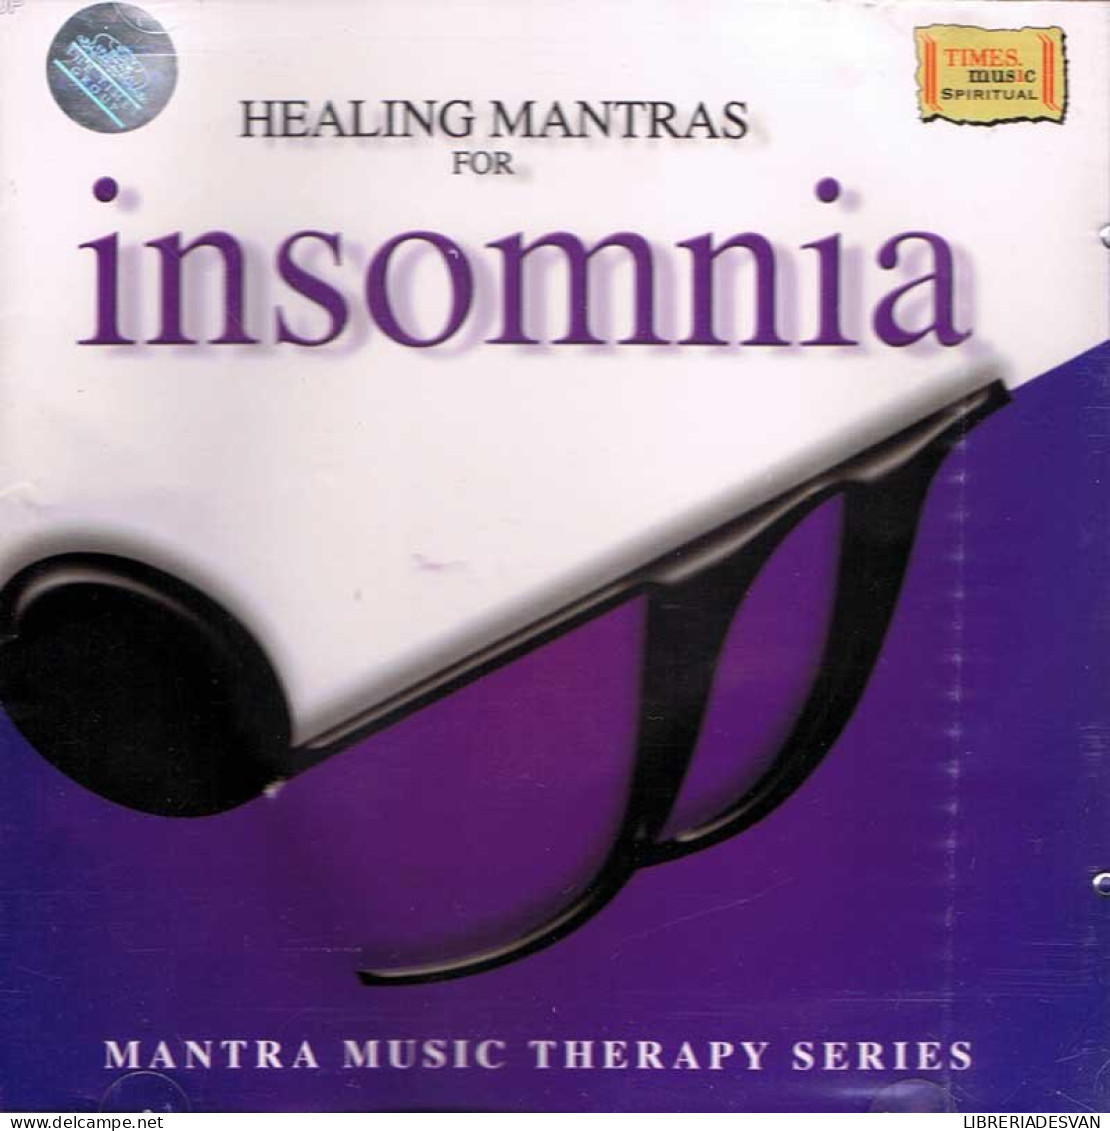 Healing Mantras For Insomnia. Mantra Music Therapy Series. CD - New Age